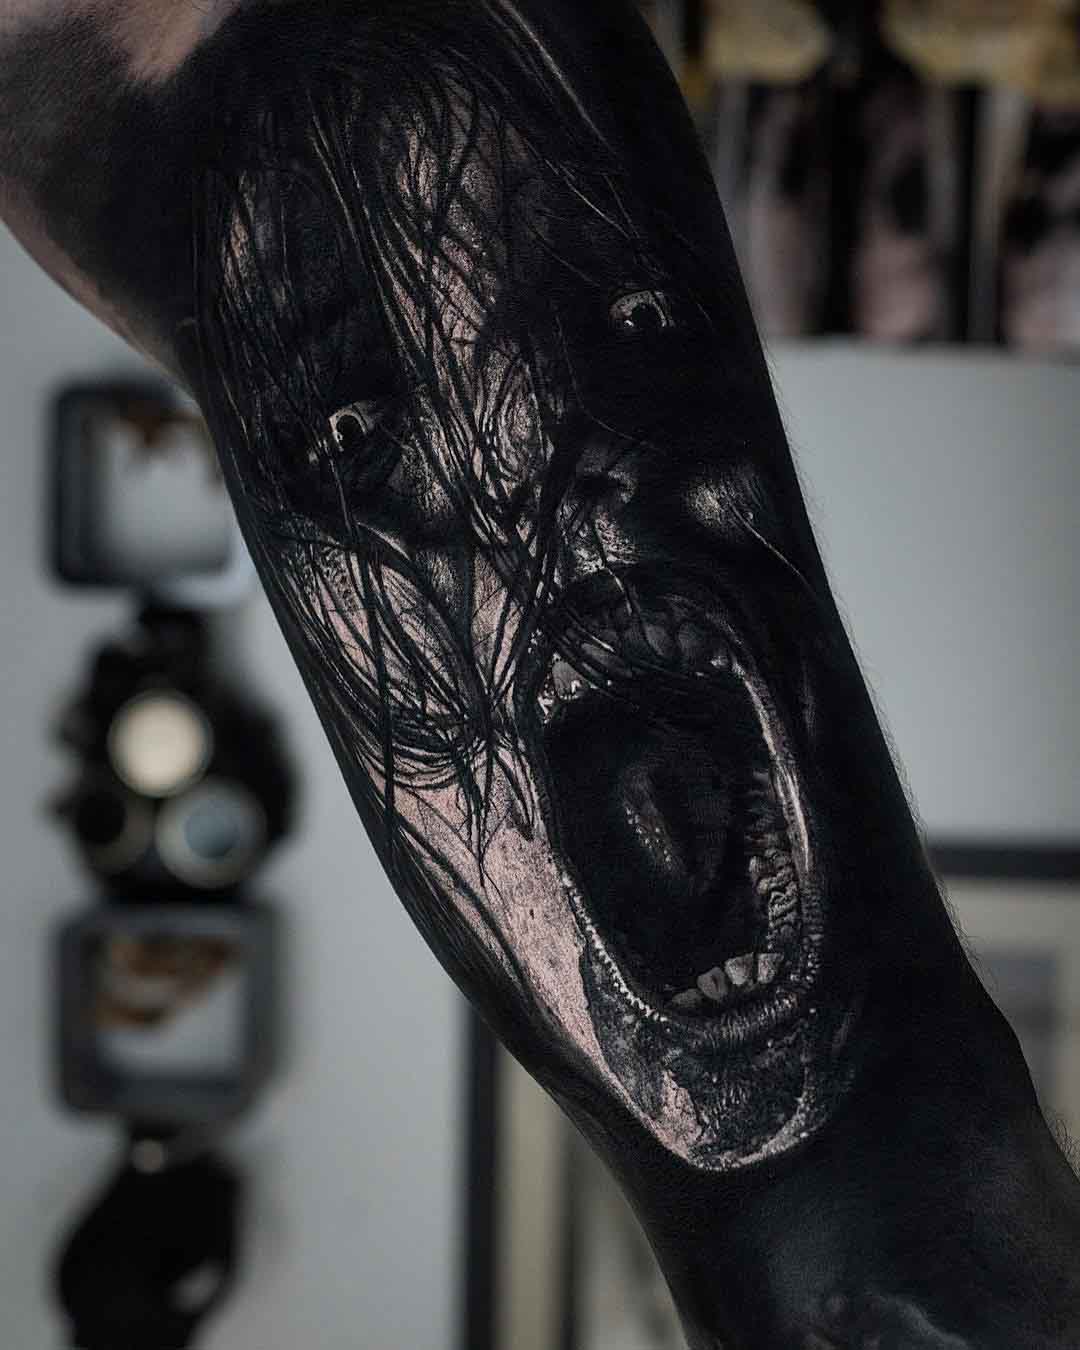 Horror Tattoos  Style Designs Ideas Sketches  InkedWay